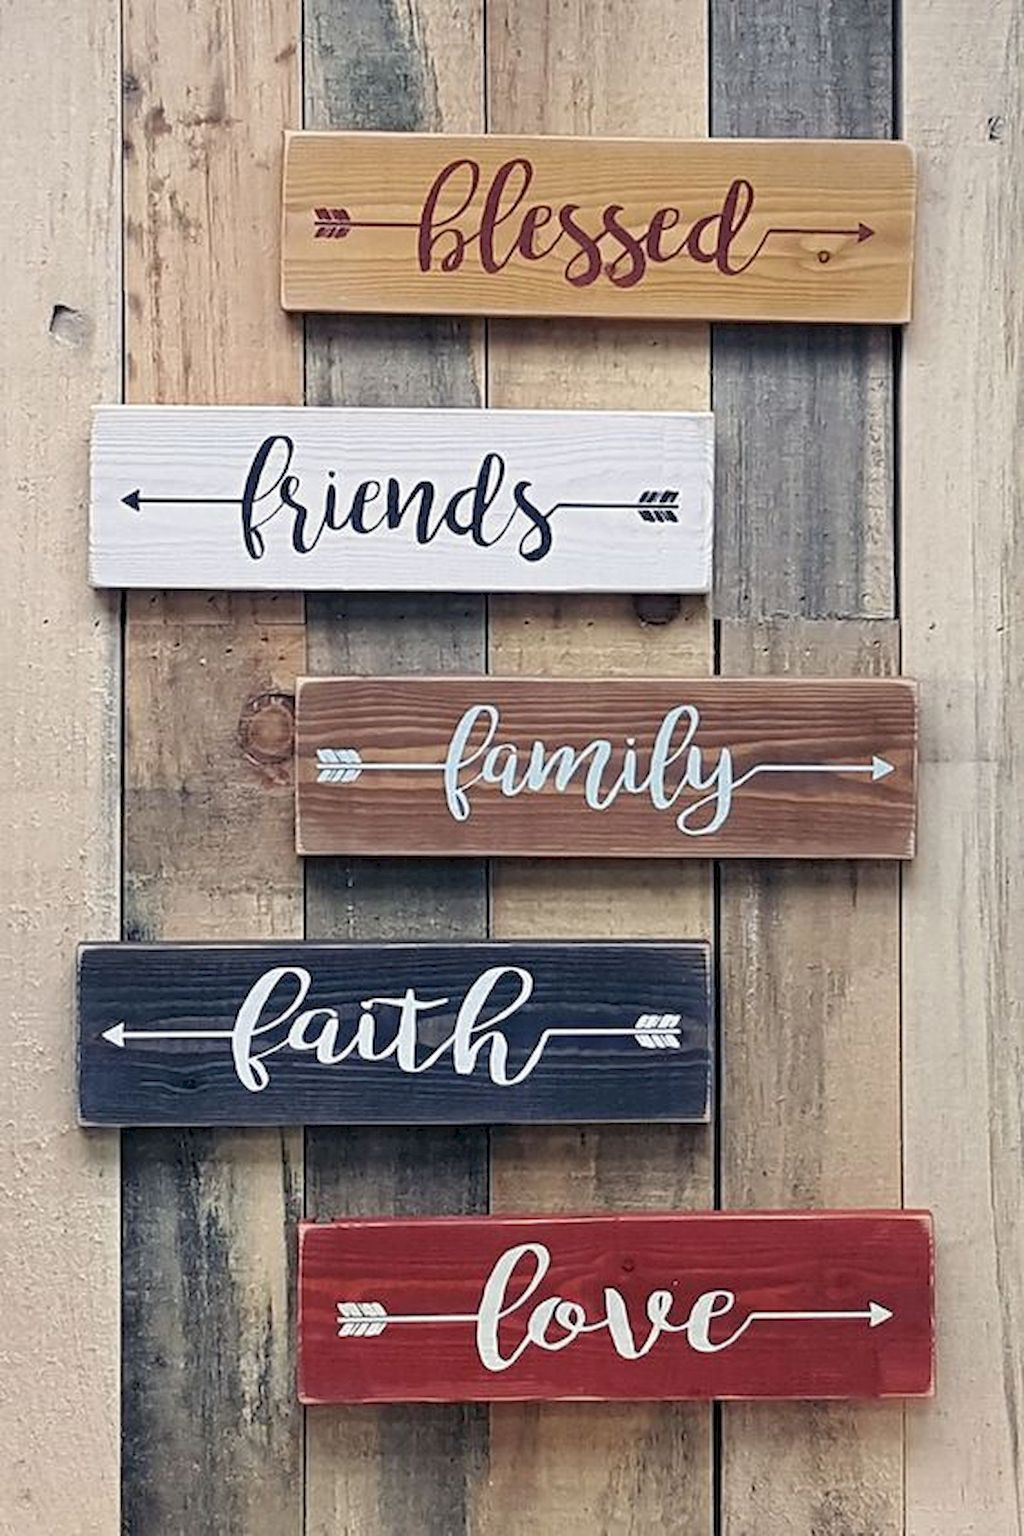 DIY Wood Sign Ideas
 Incredibly diy wood sign ideas with quotes to decor your